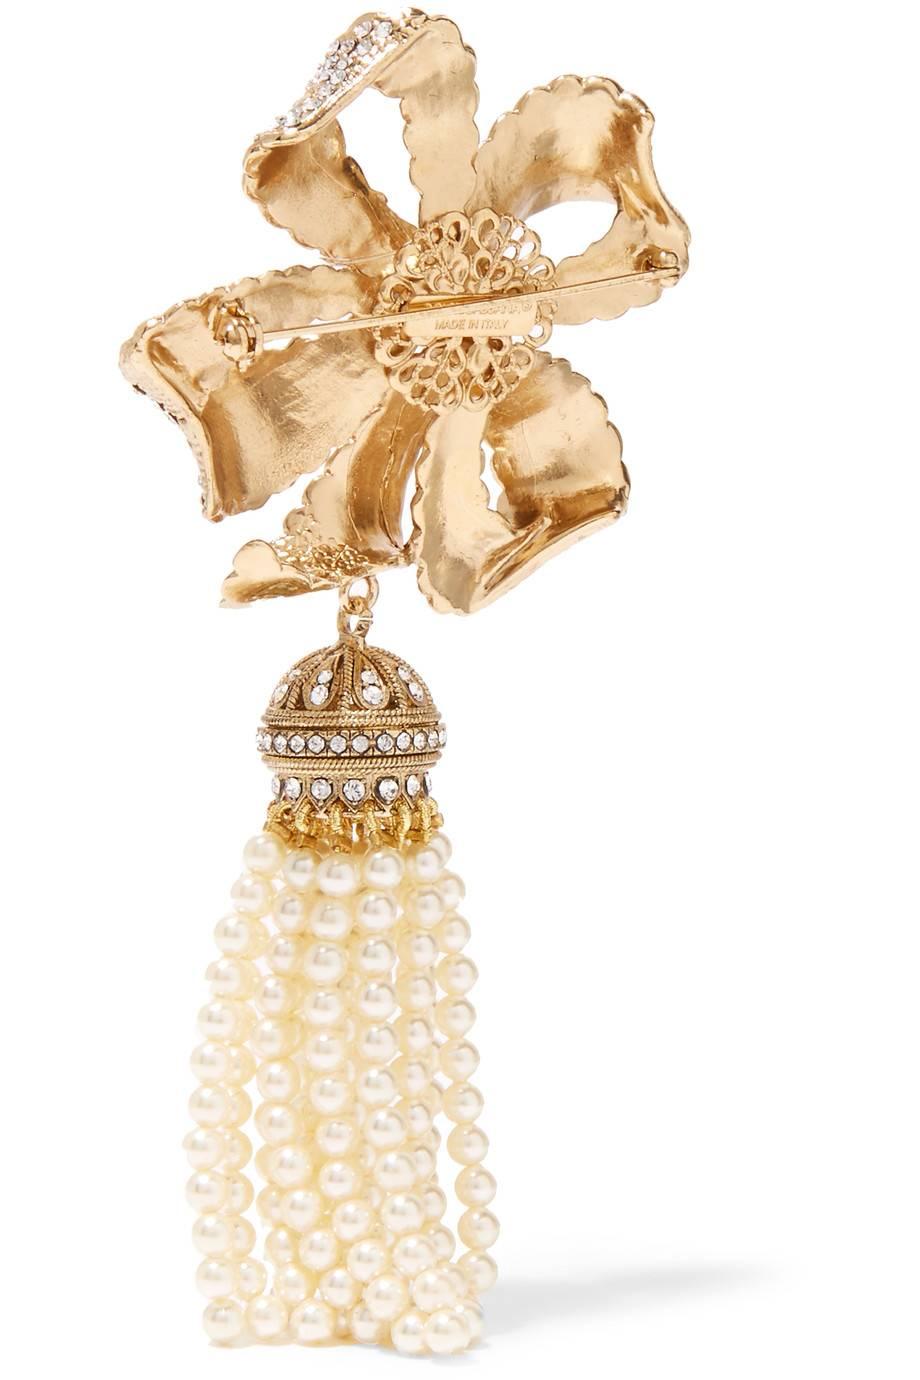 CURATOR'S NOTES

Brass
Gold tone
Swarovski crystal
Faux pearl
Pin closure 
Made in Italy
Measures 2.5